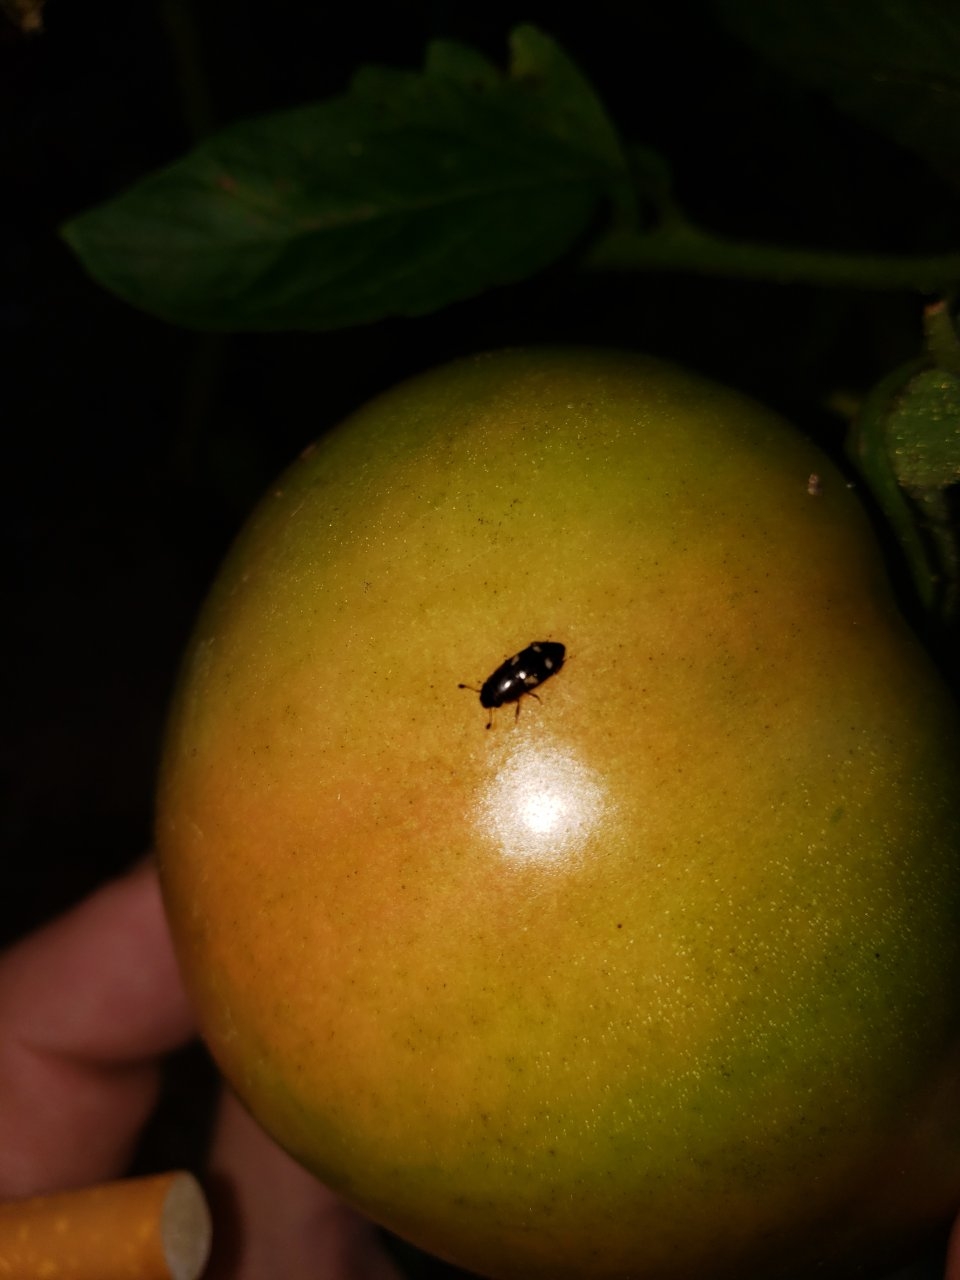 These r the bugs tht r eatn tomato